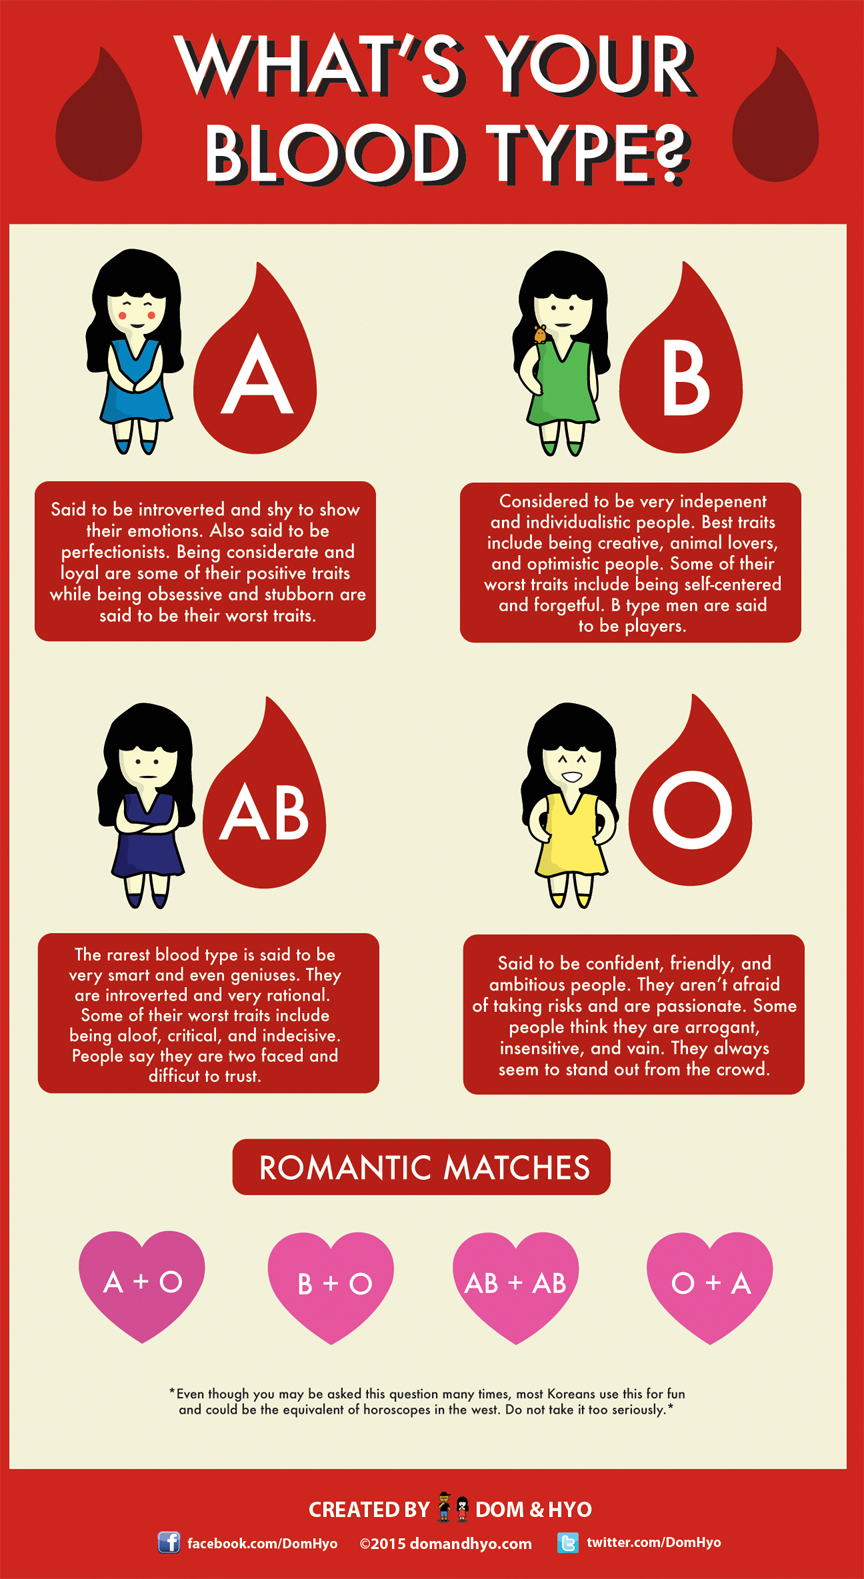 Blood Types in Korea Infographic